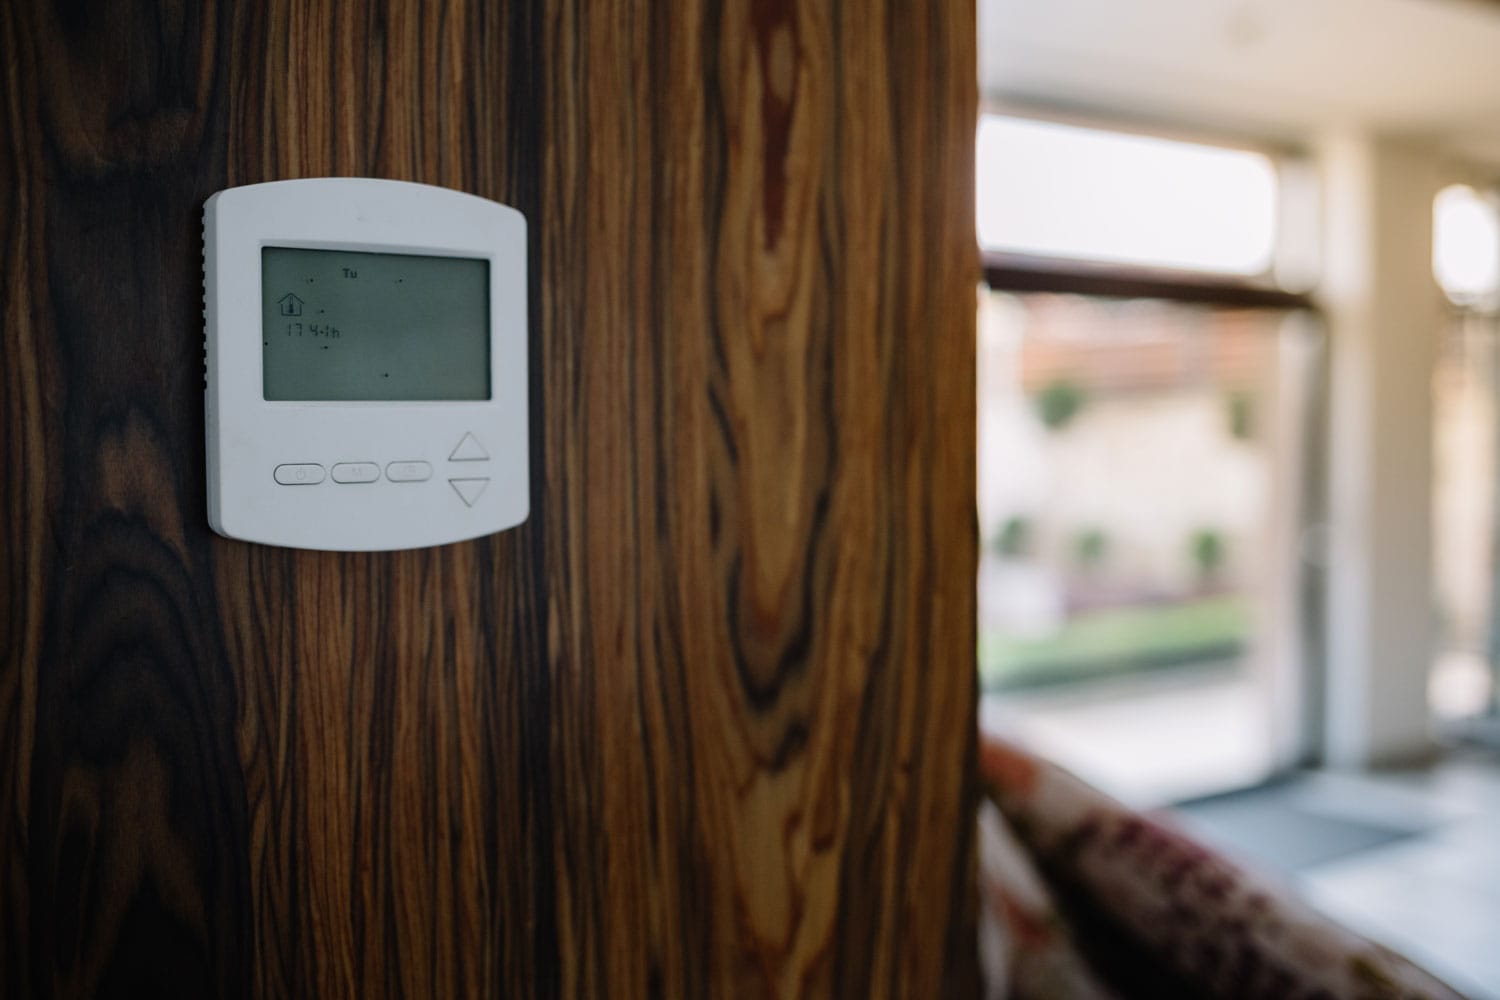 Programmable thermostat installed in the living room wall